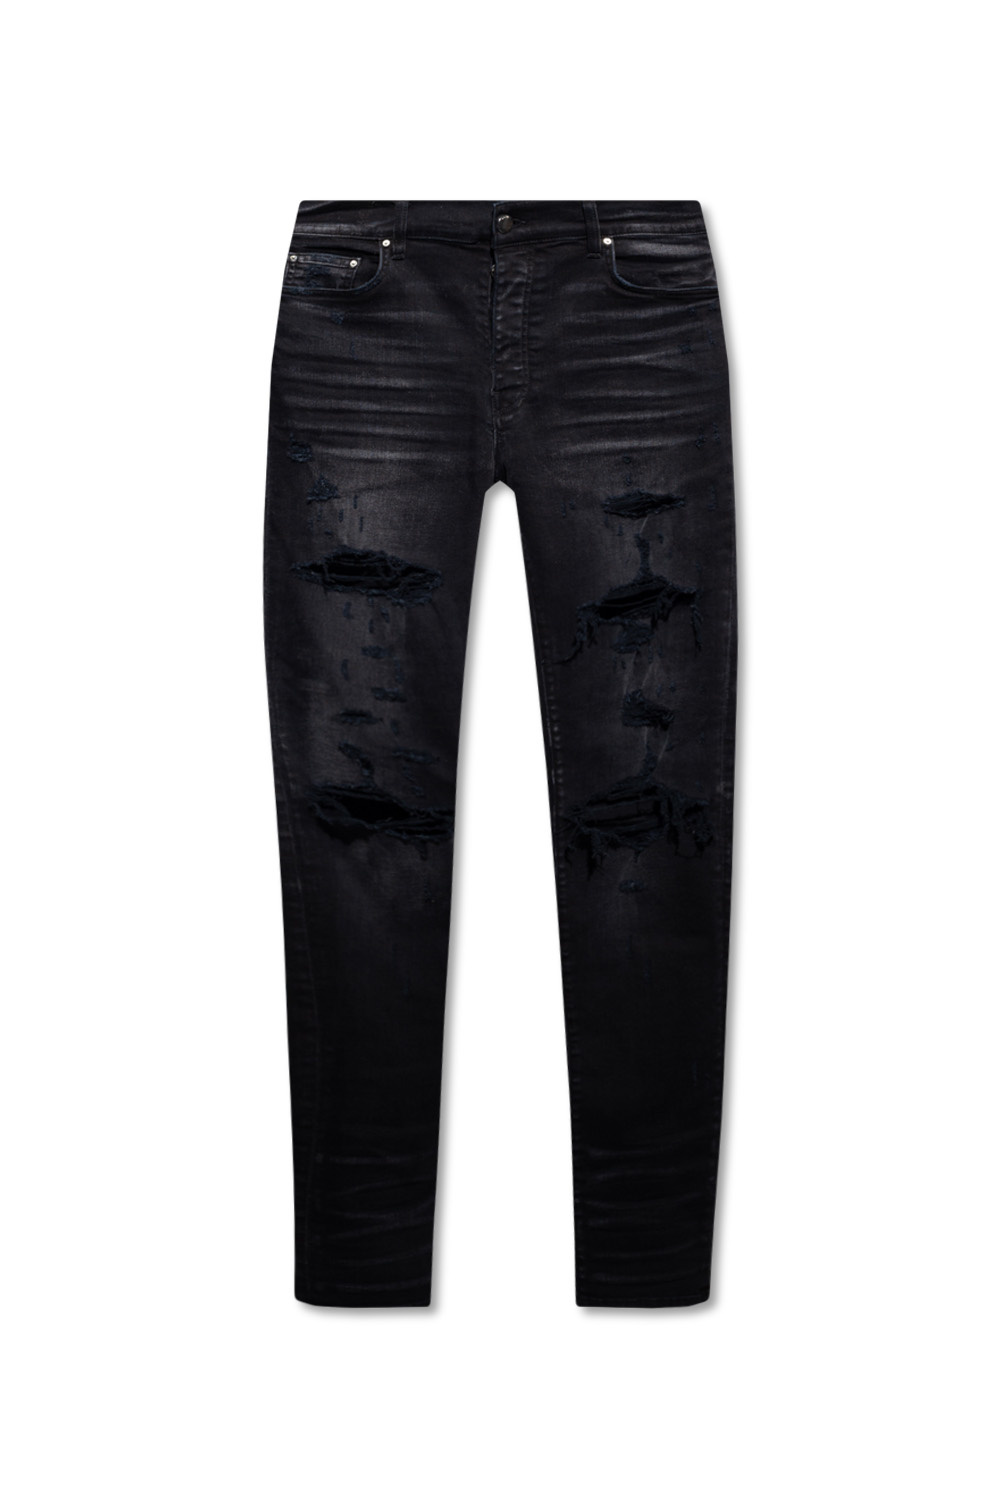 Amiri Jeans with vintage effect